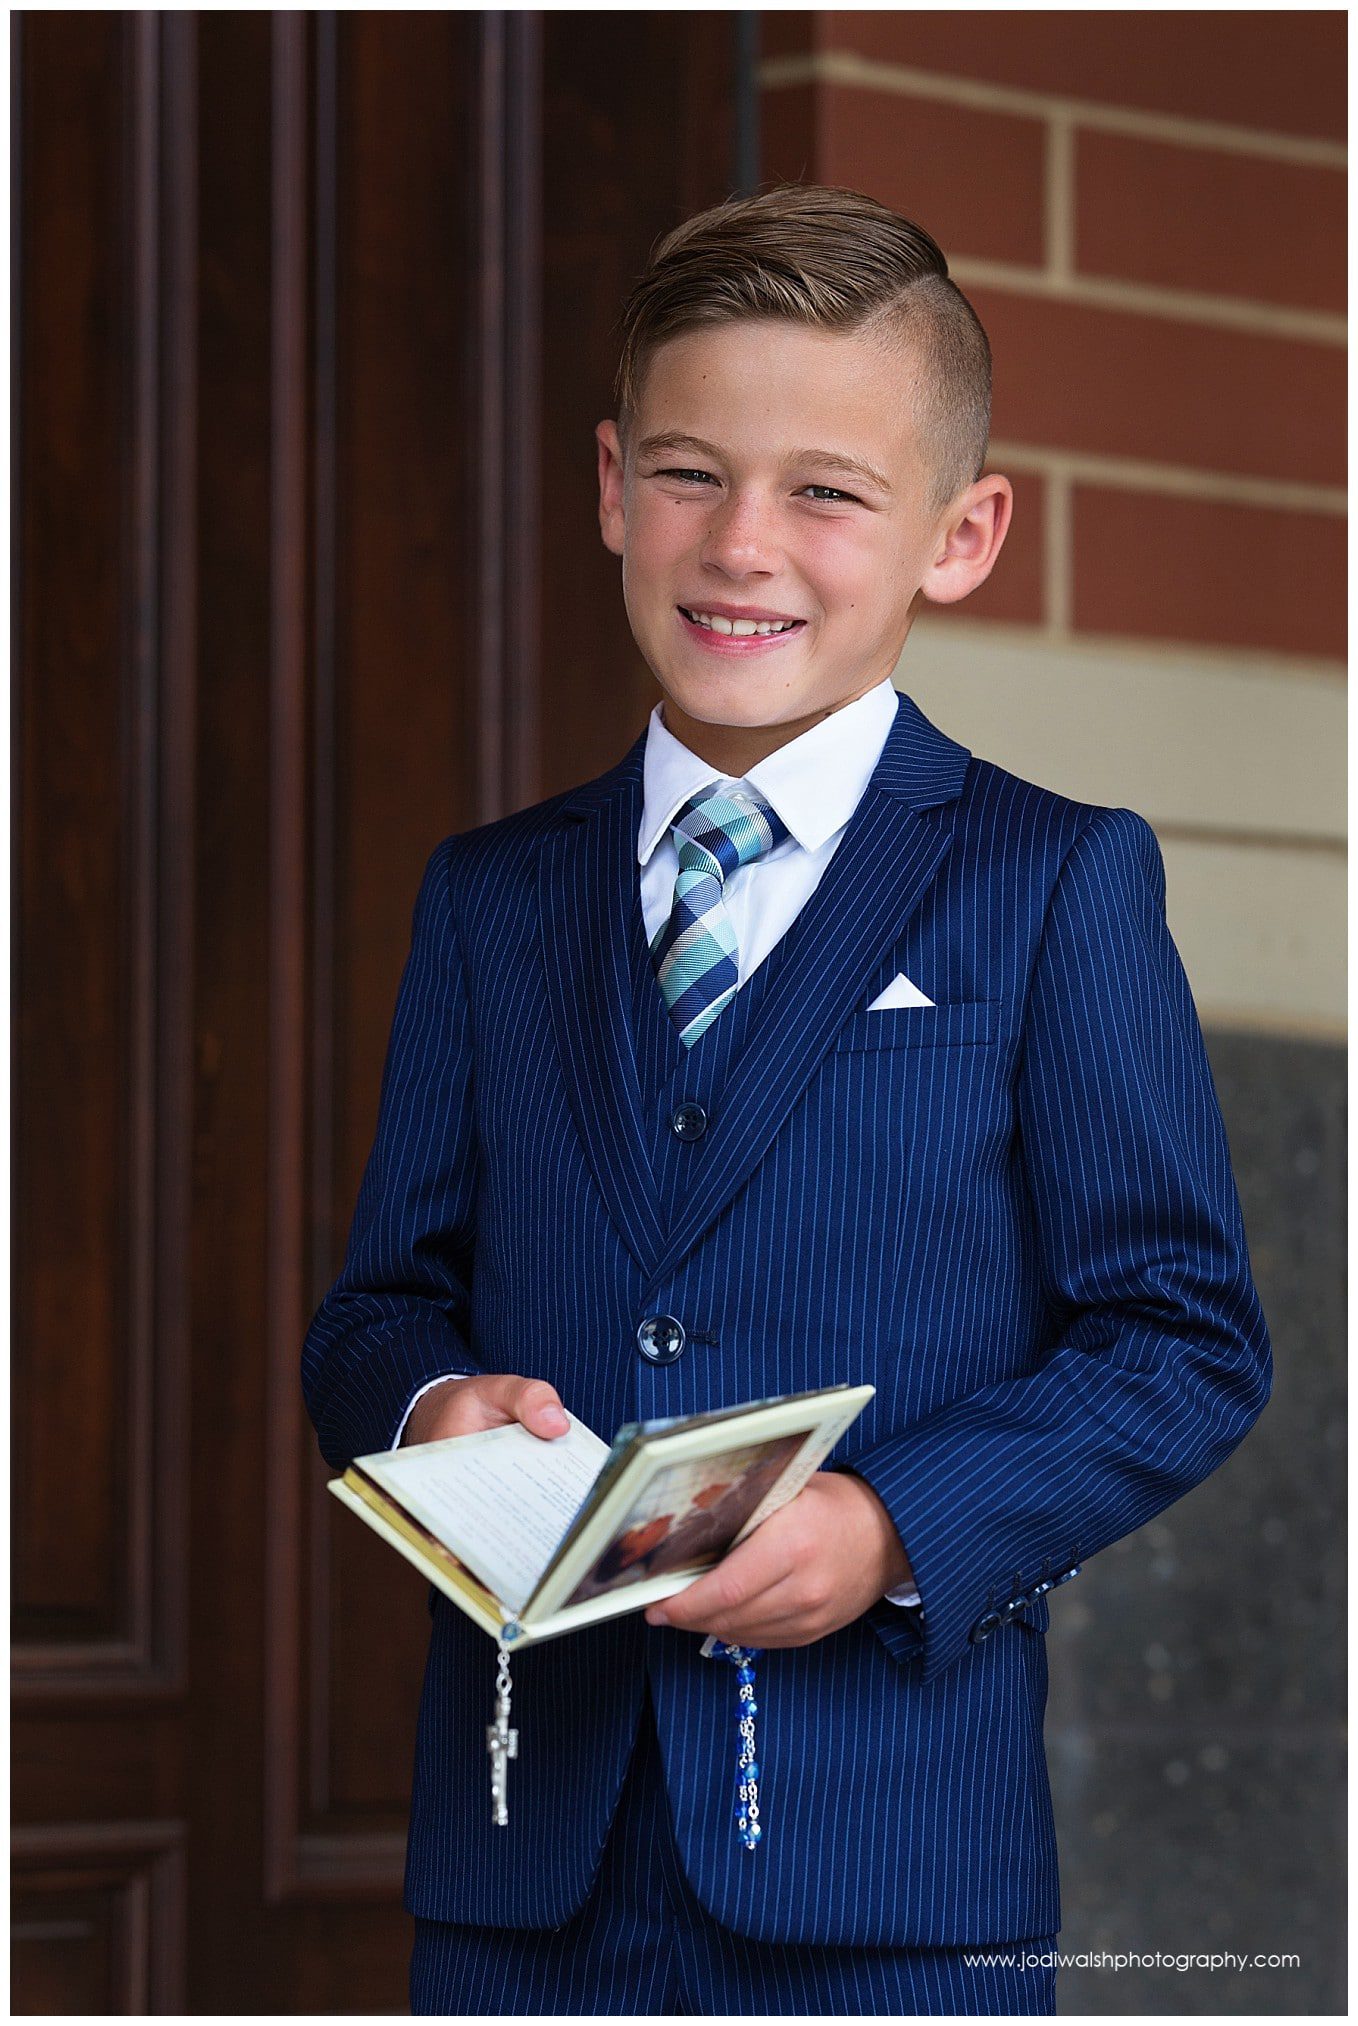 image of a young boy wearing a blue suit holding a prayer book for his first holy communion